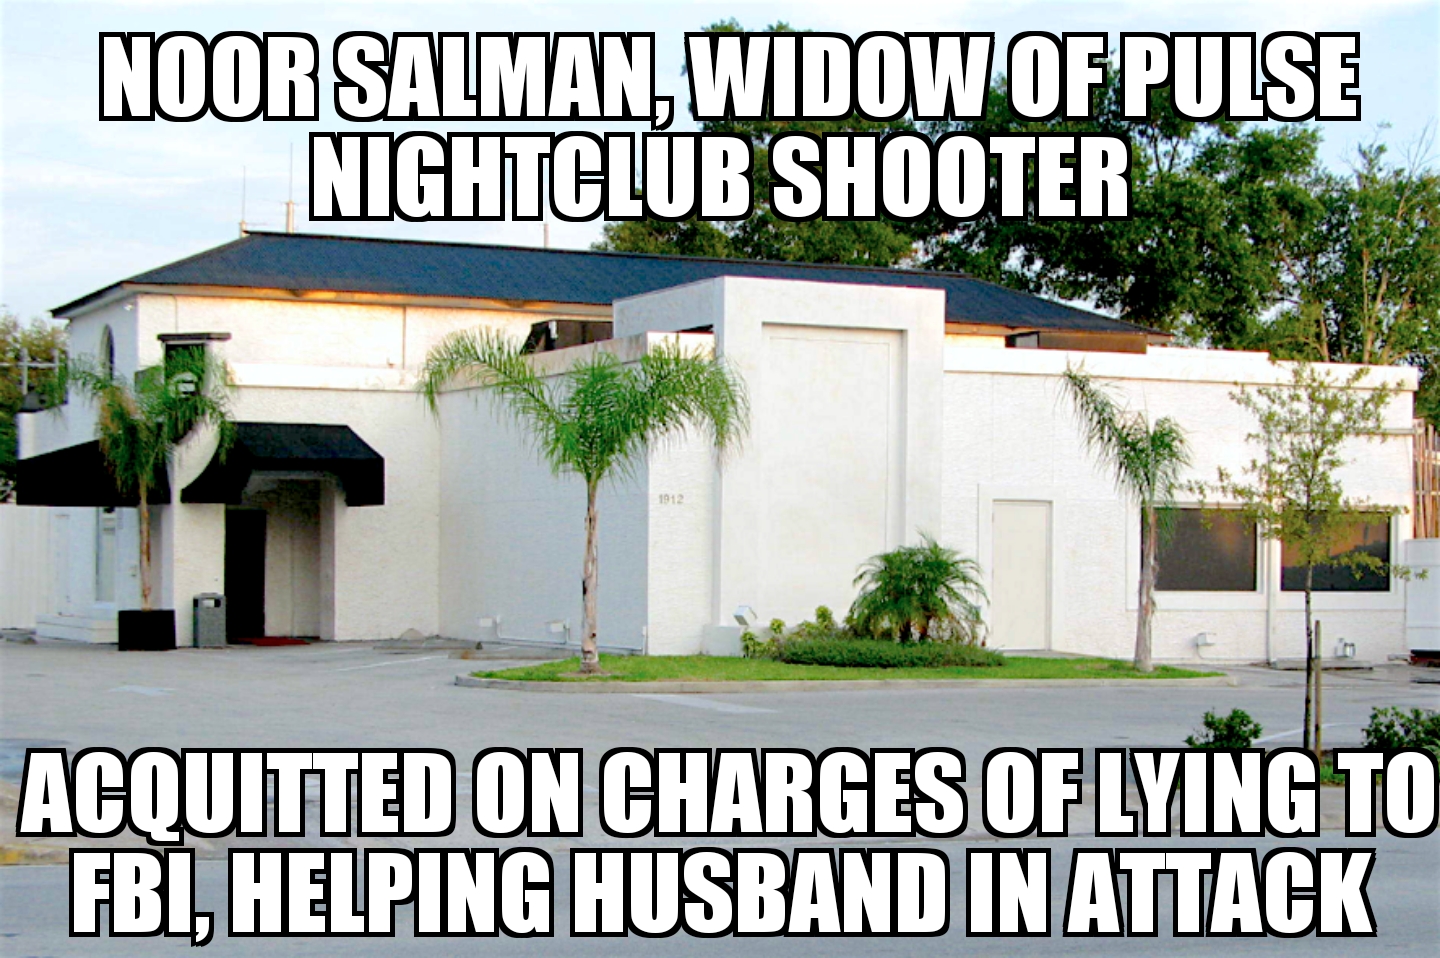 Pulse Nightclub shooter widow acquitted